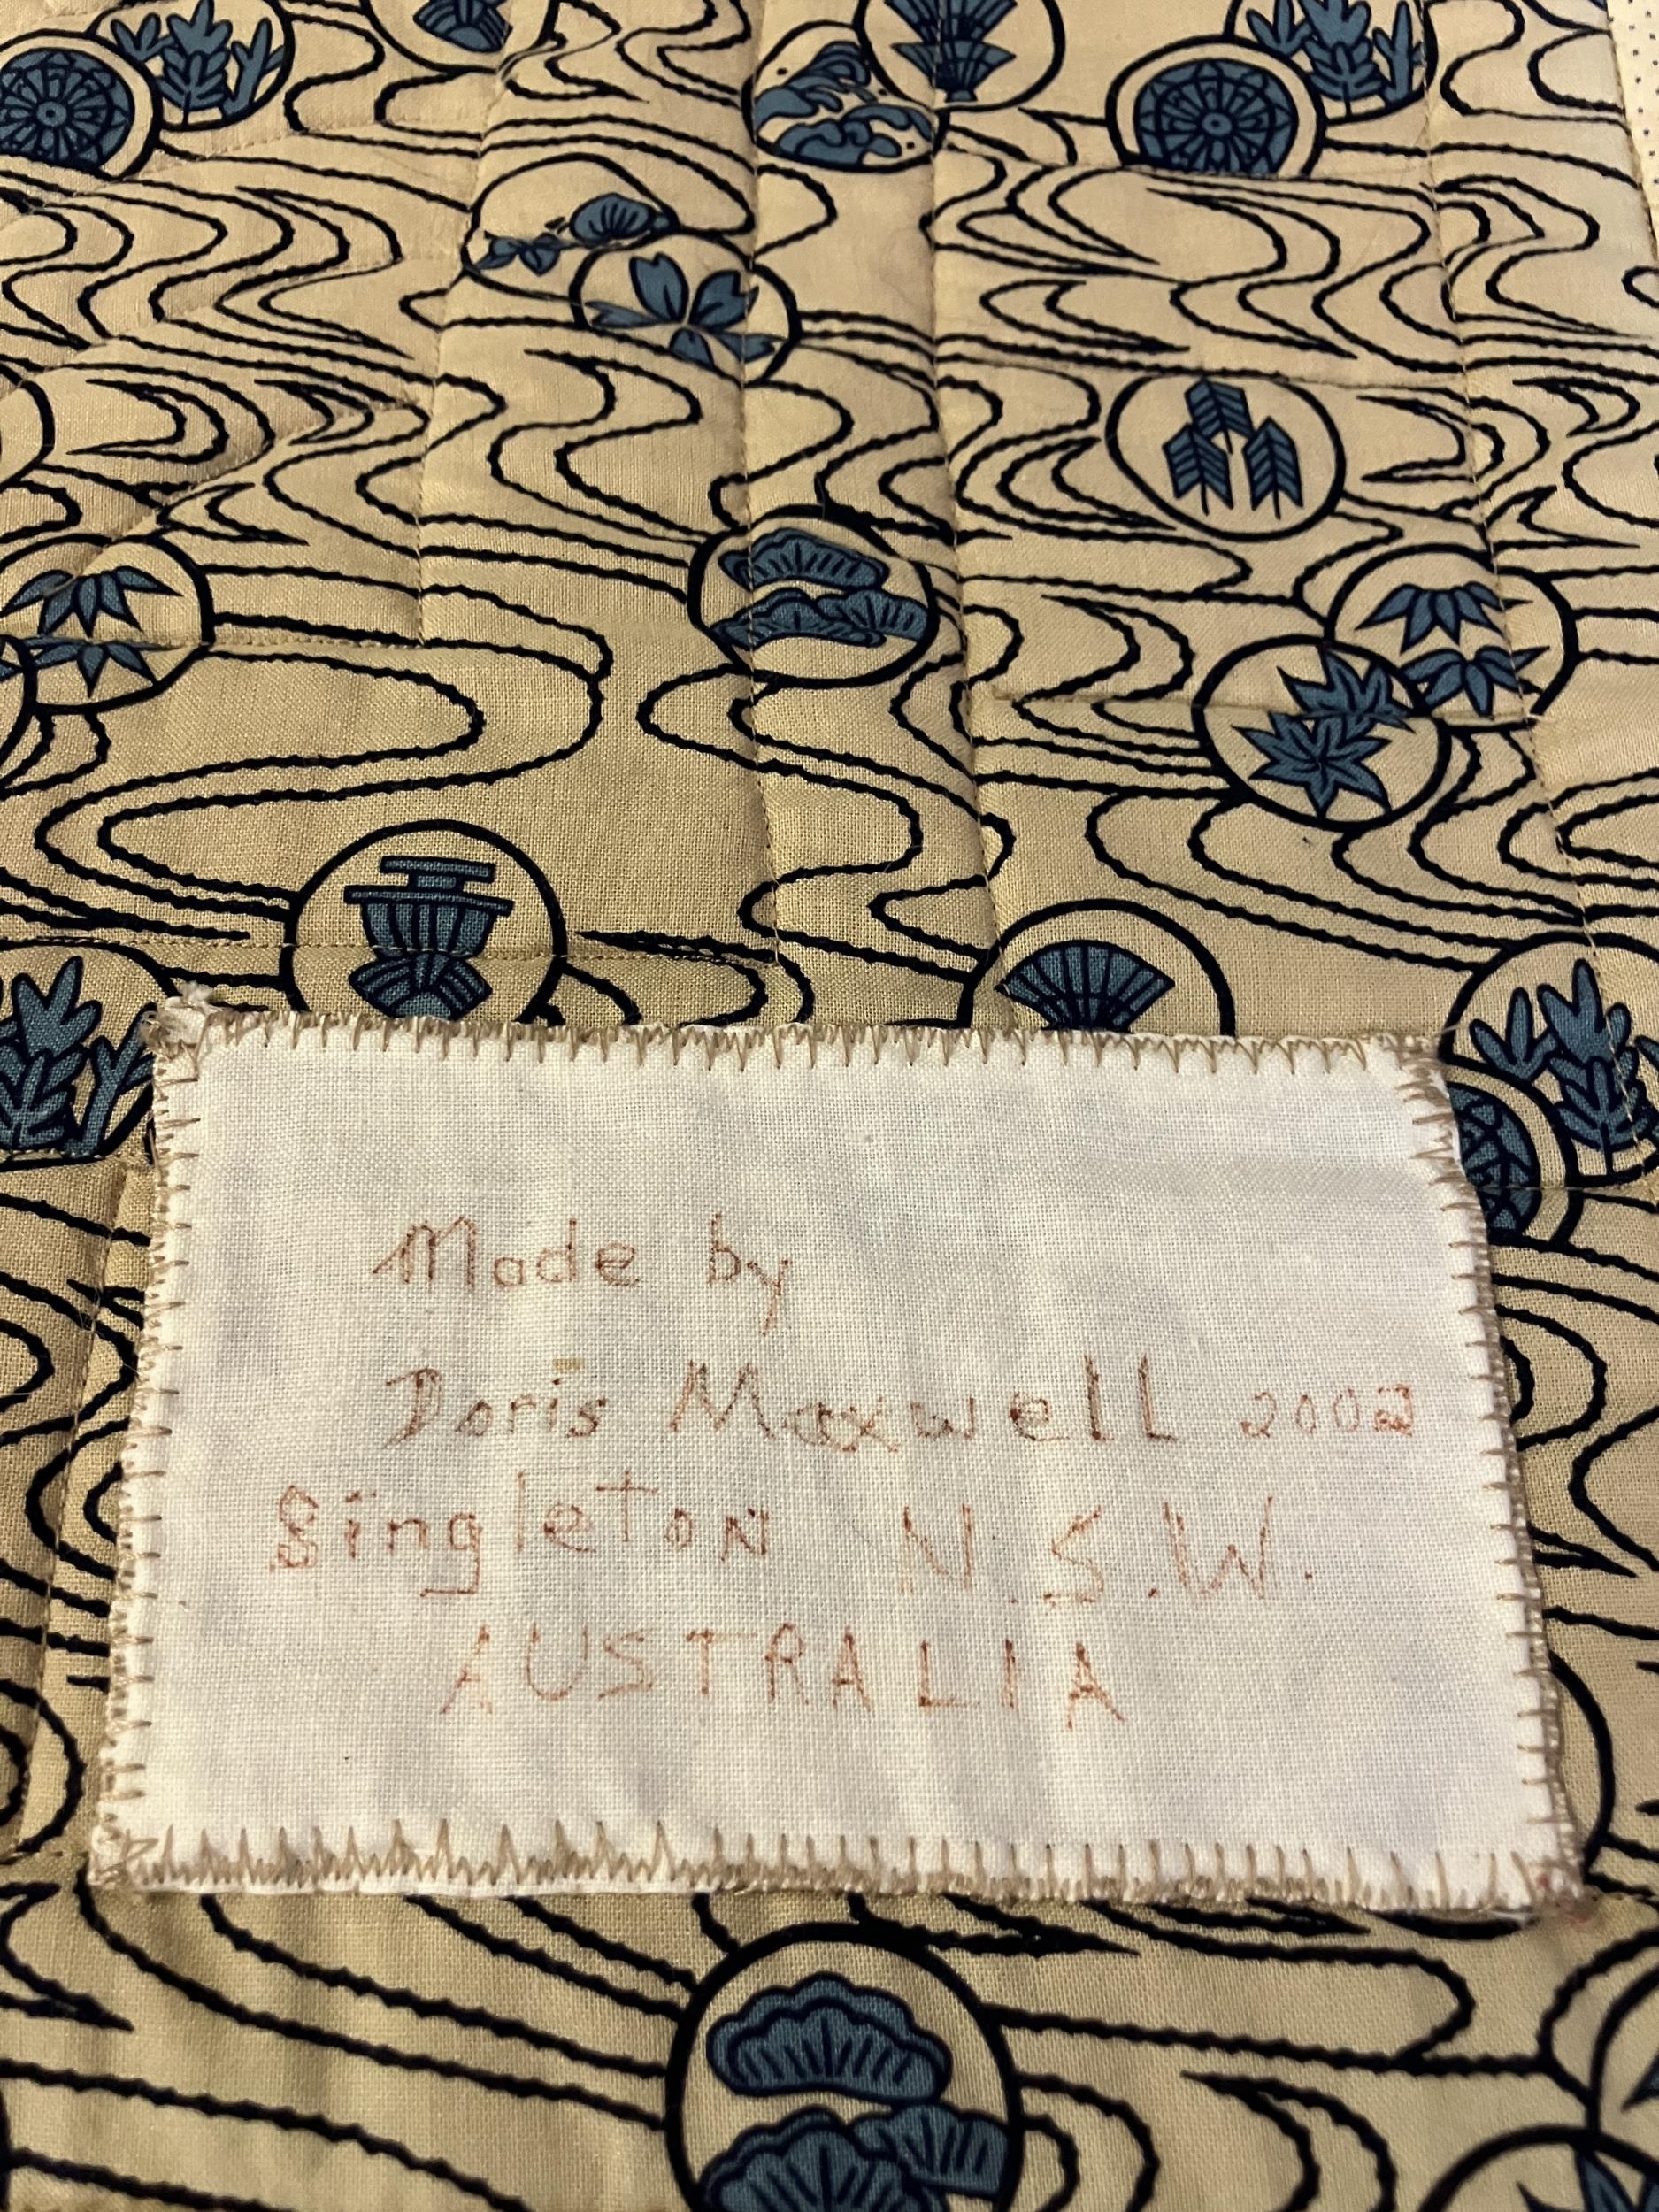 Original fan-designed machine-stitched coverlet by Doris Maxwell, mother of former Fan Circle - Image 5 of 6